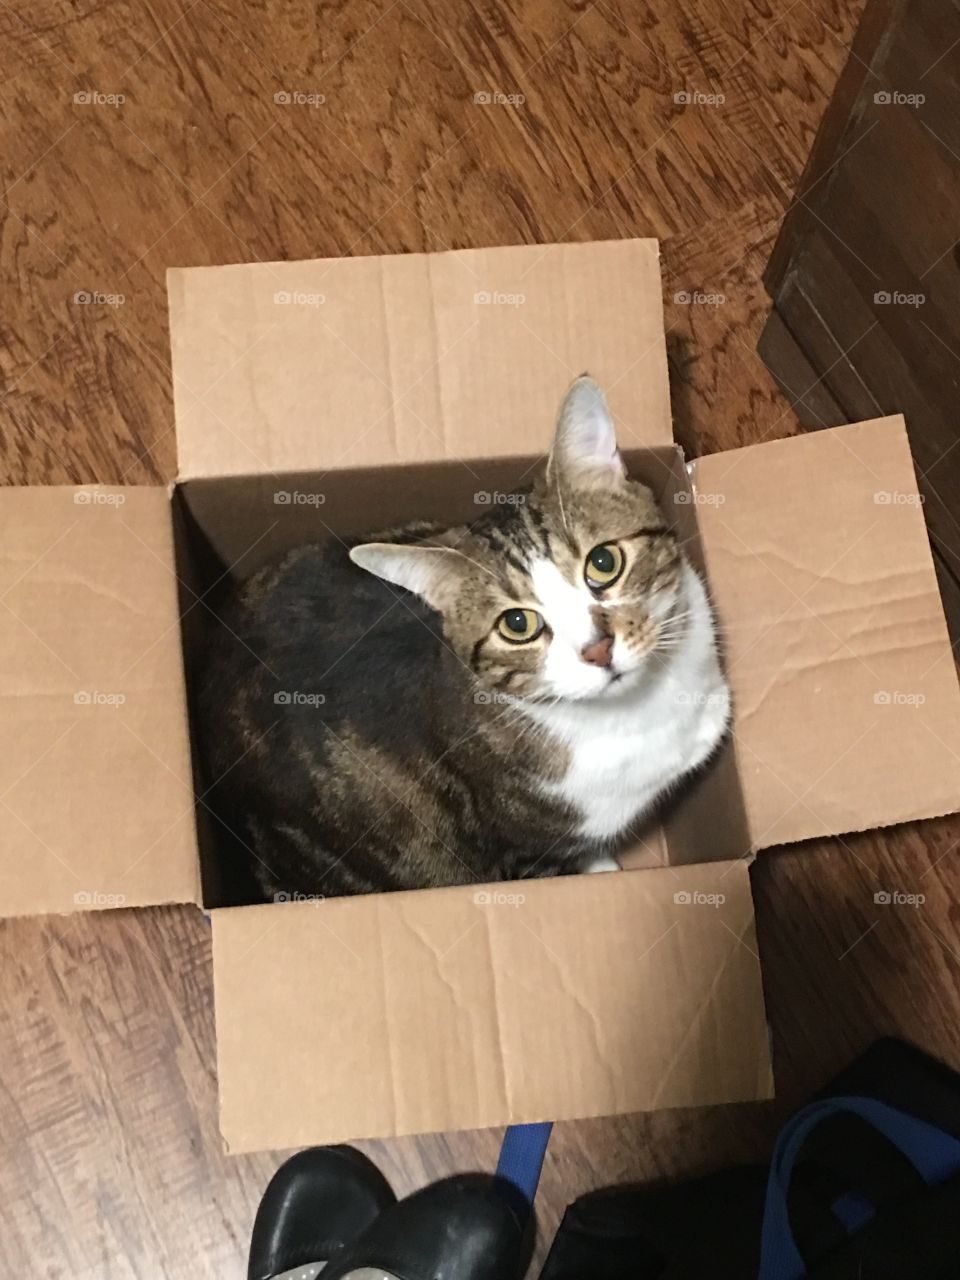 he barely fits